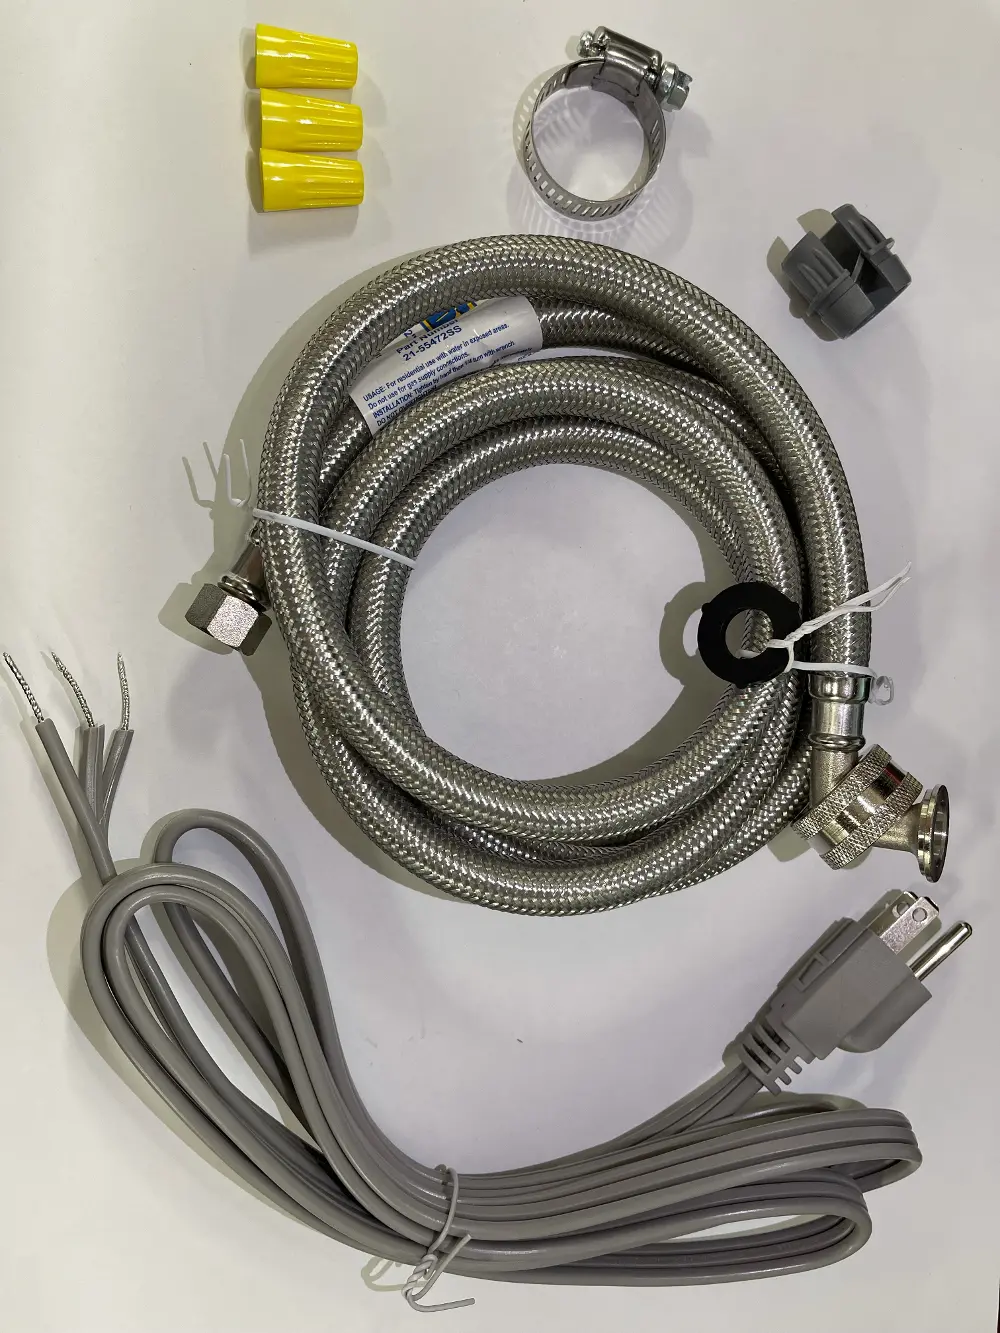 Dishwasher Install Kit with Wire Nuts, Cord Clamp and Hose Clamp-1